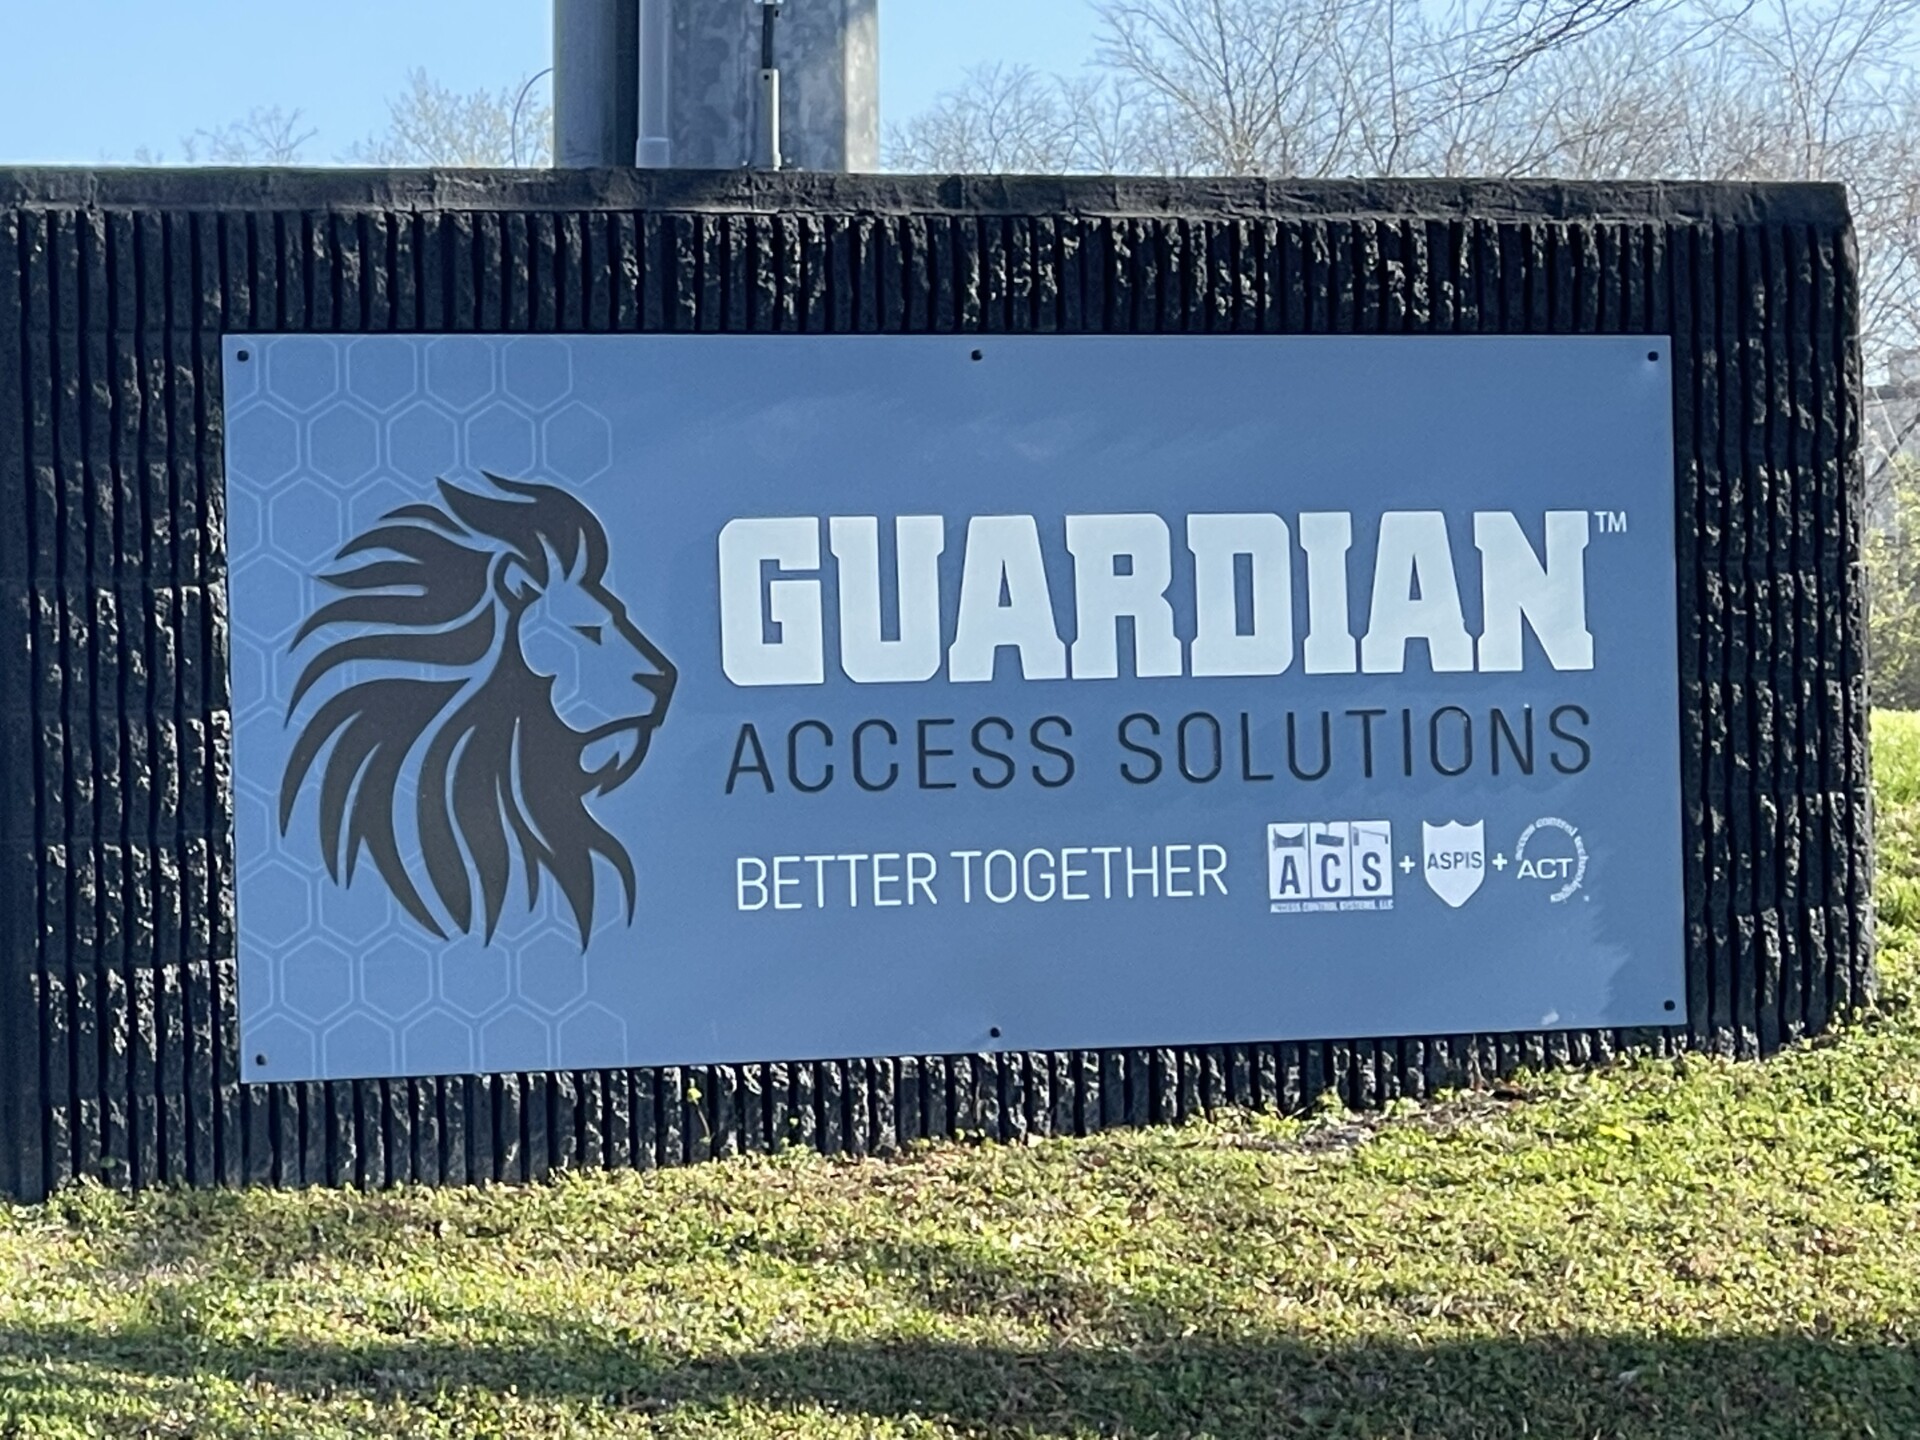 Guardian Access Solutions business merger sign with ACS, ASPIS, and ACT.